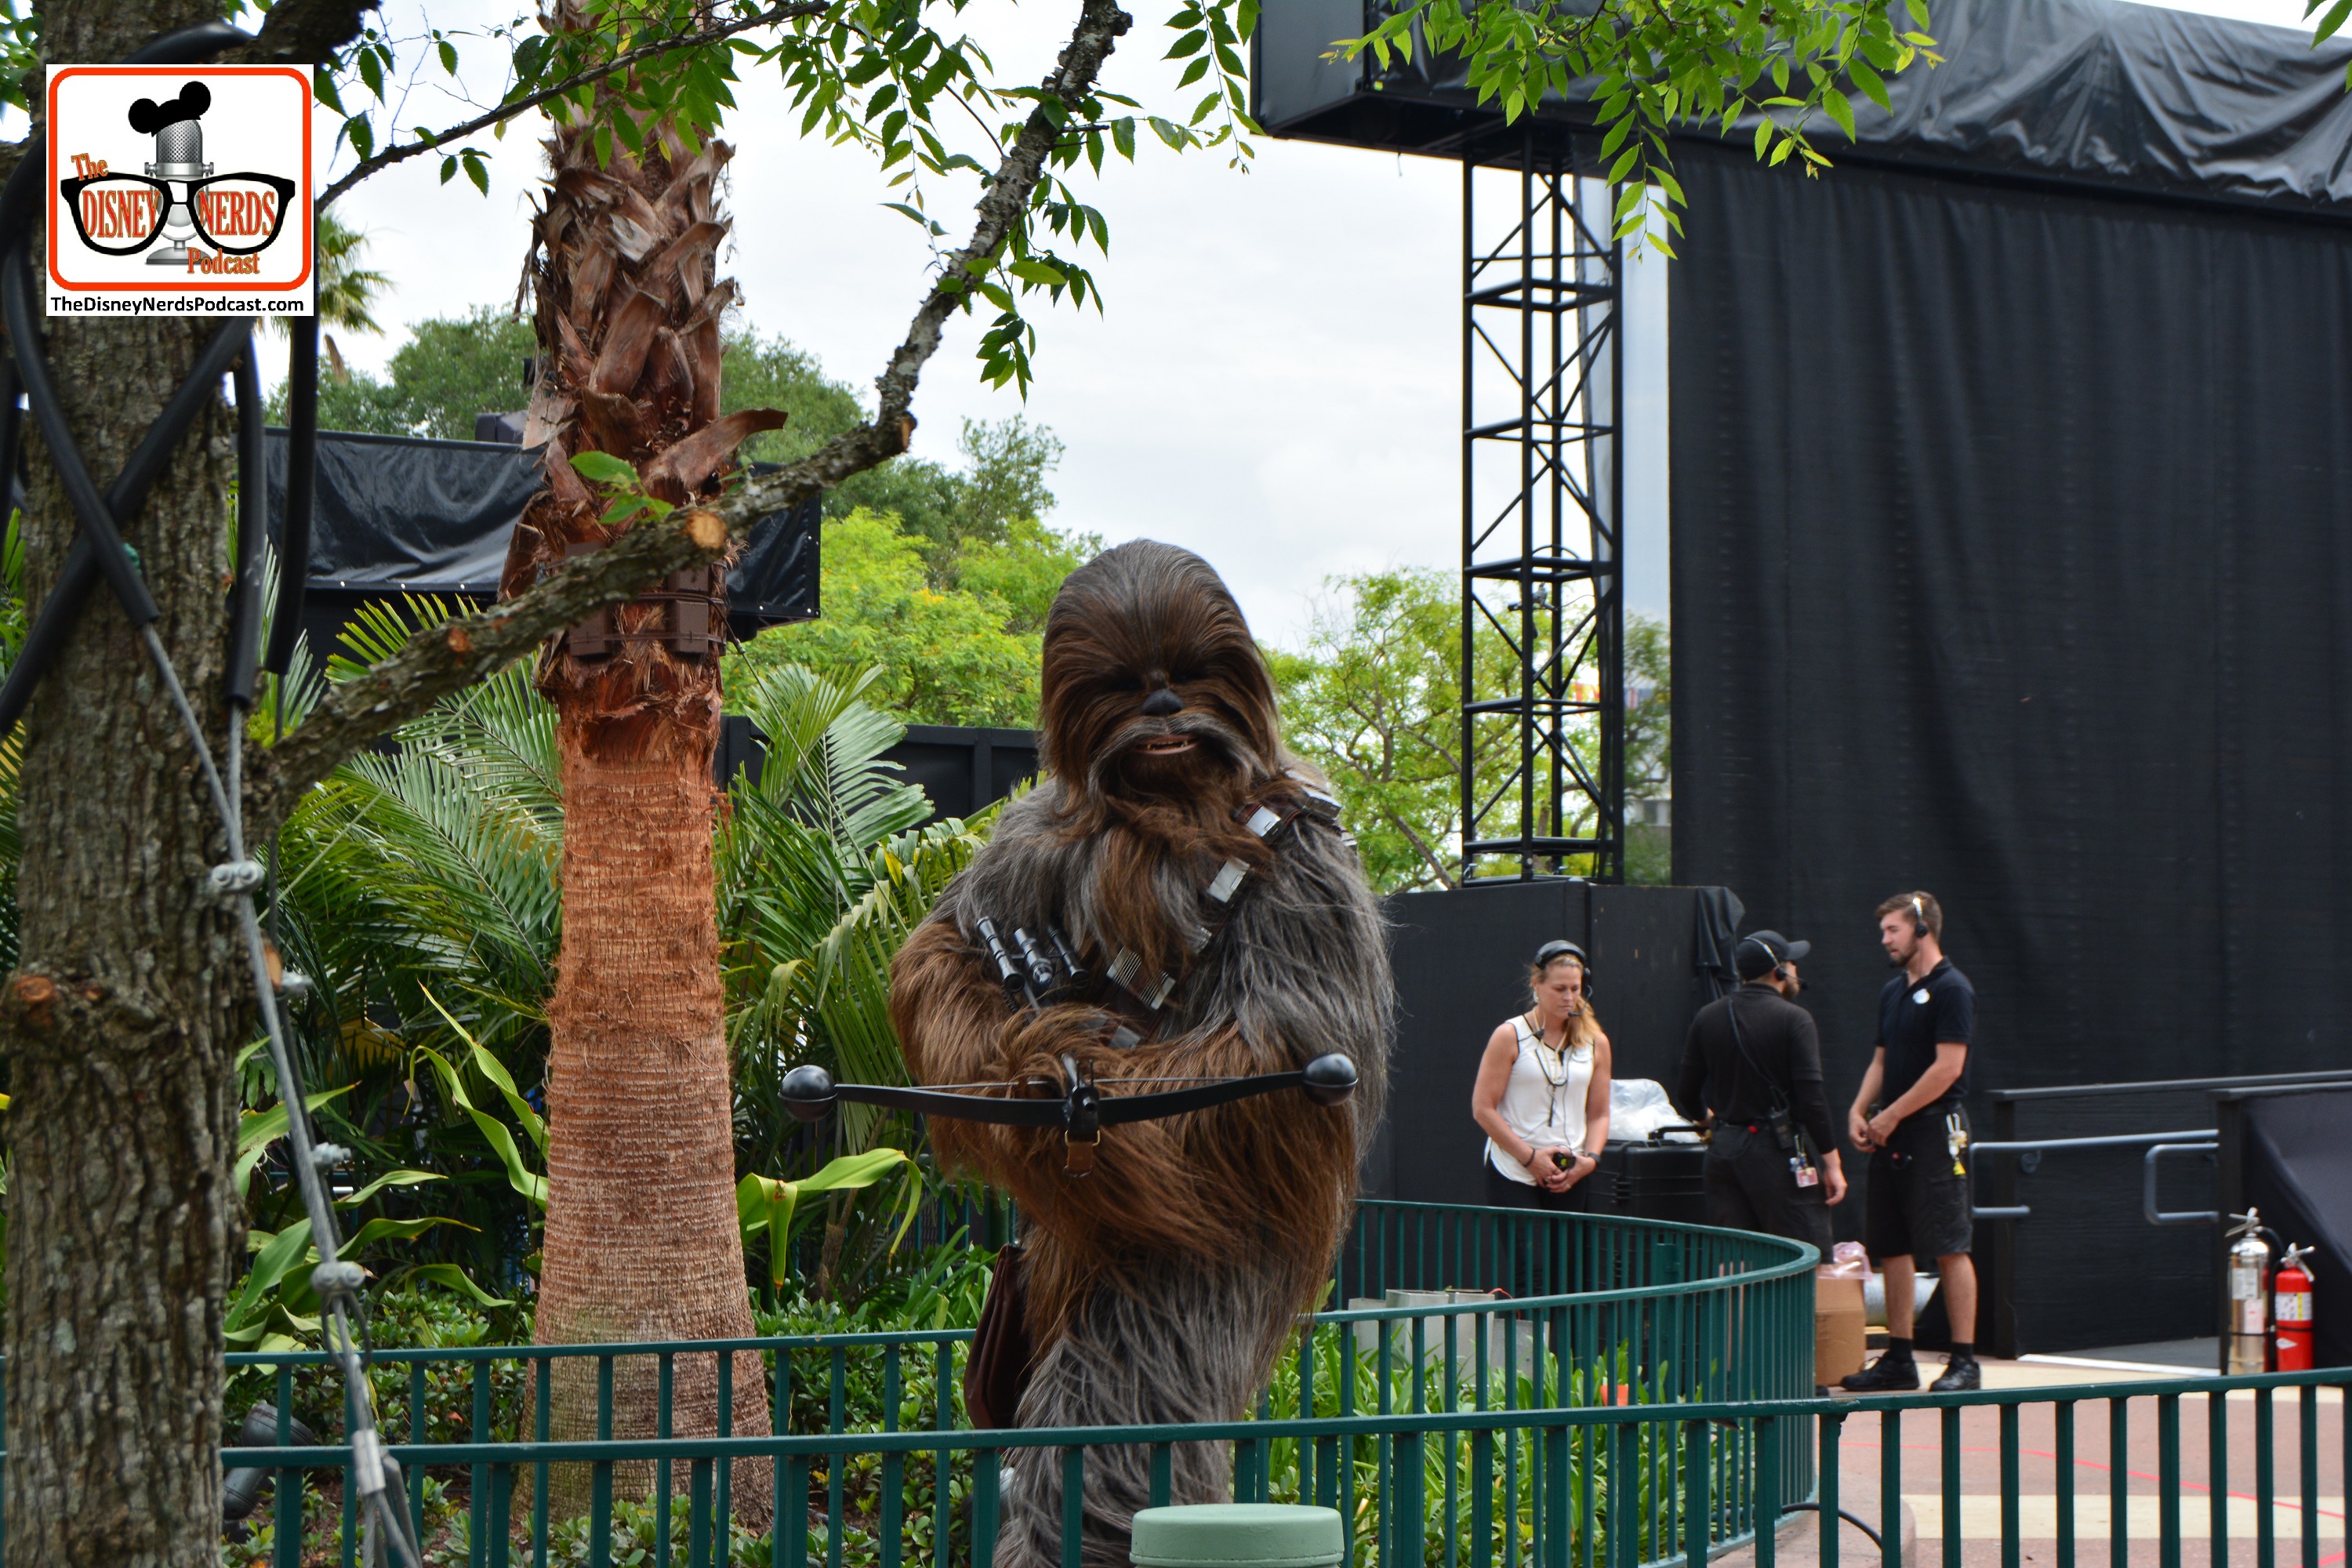 DNP April 2016 Photo Report: Hollywood Studios: Chewy prepares to enter the stage for the "Galaxy Far, Far away stage show."